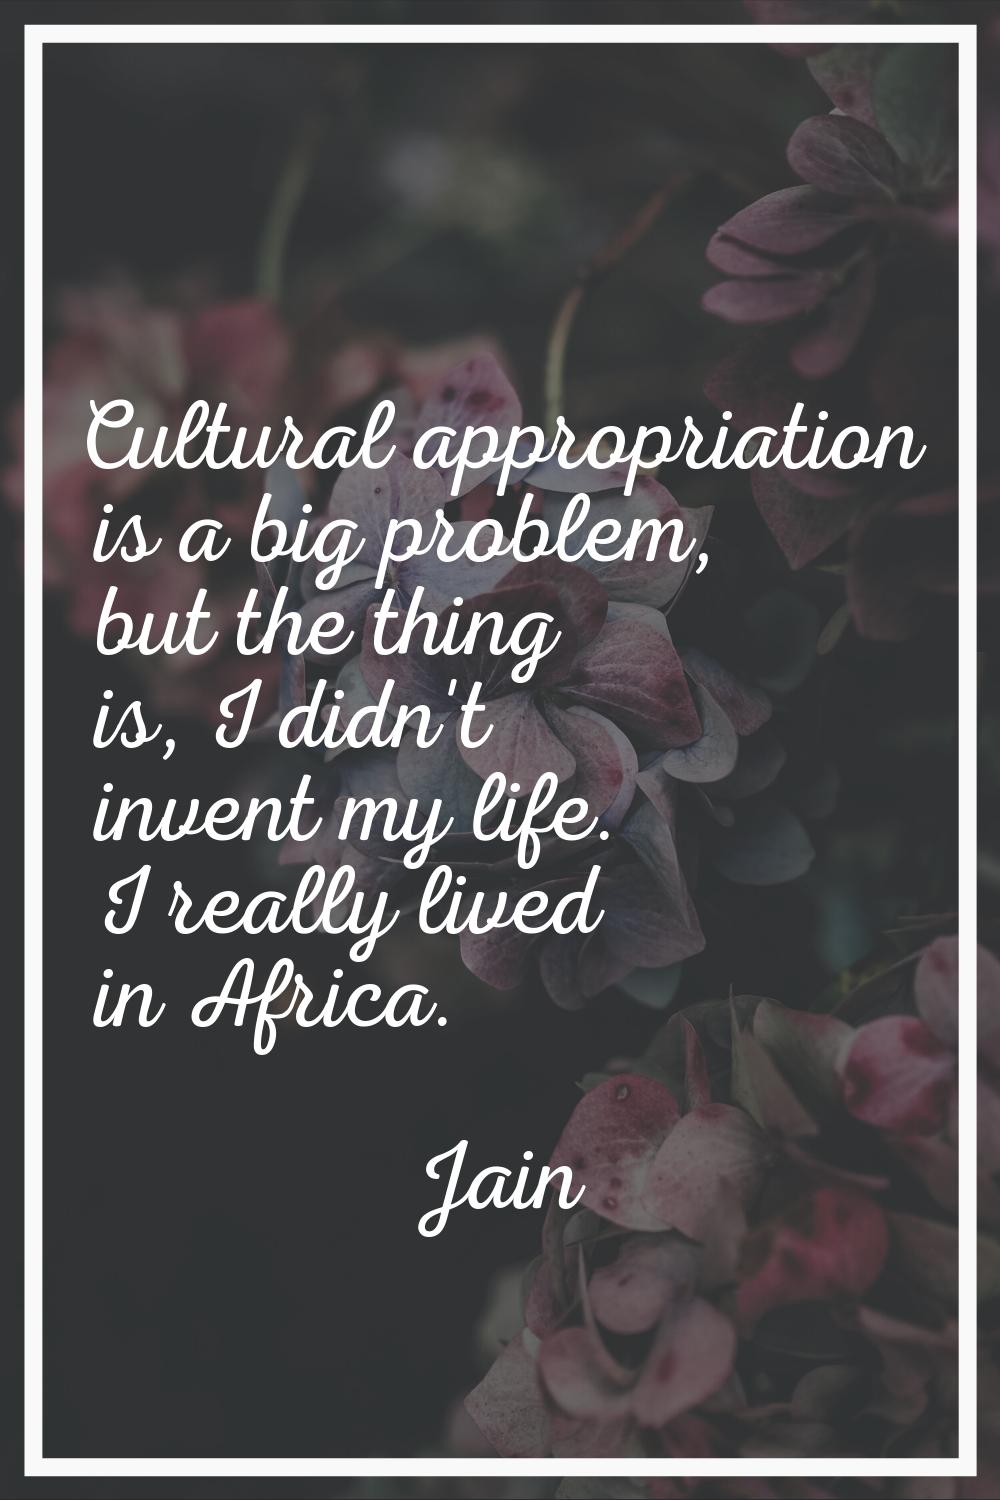 Cultural appropriation is a big problem, but the thing is, I didn't invent my life. I really lived 